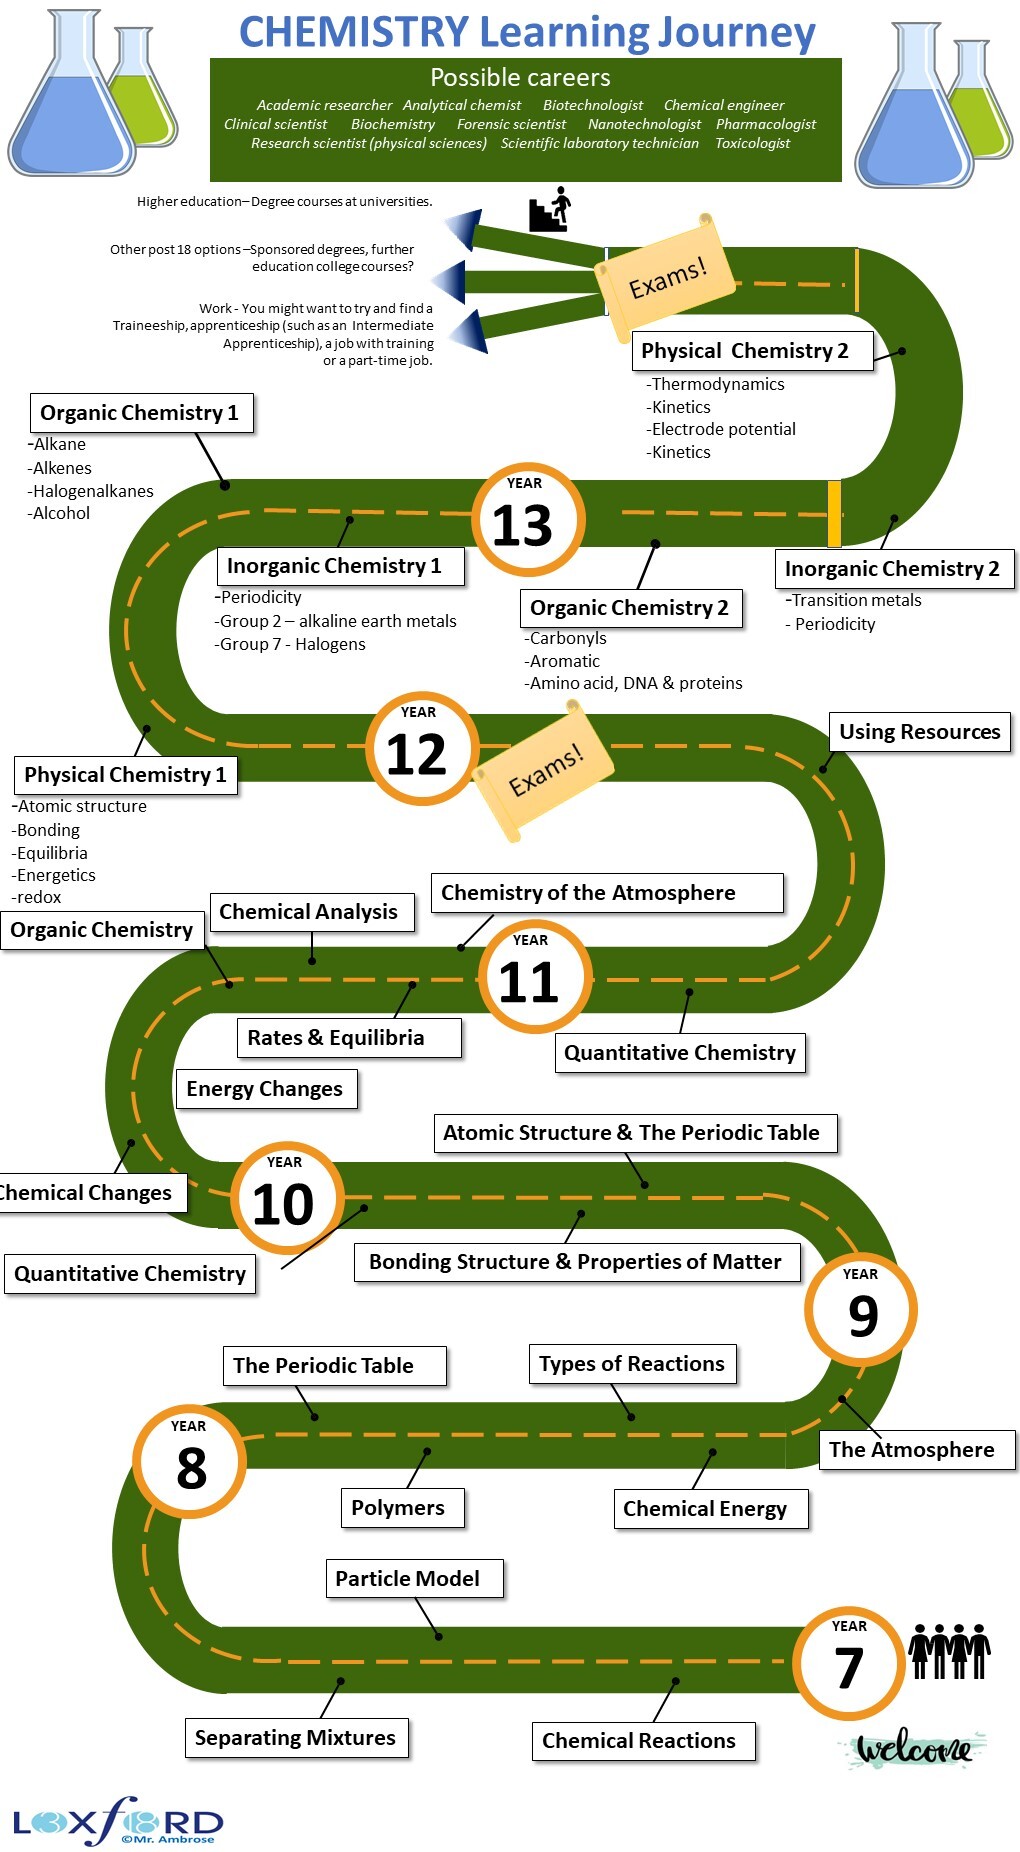 Chemistry Learning Journey Tabor